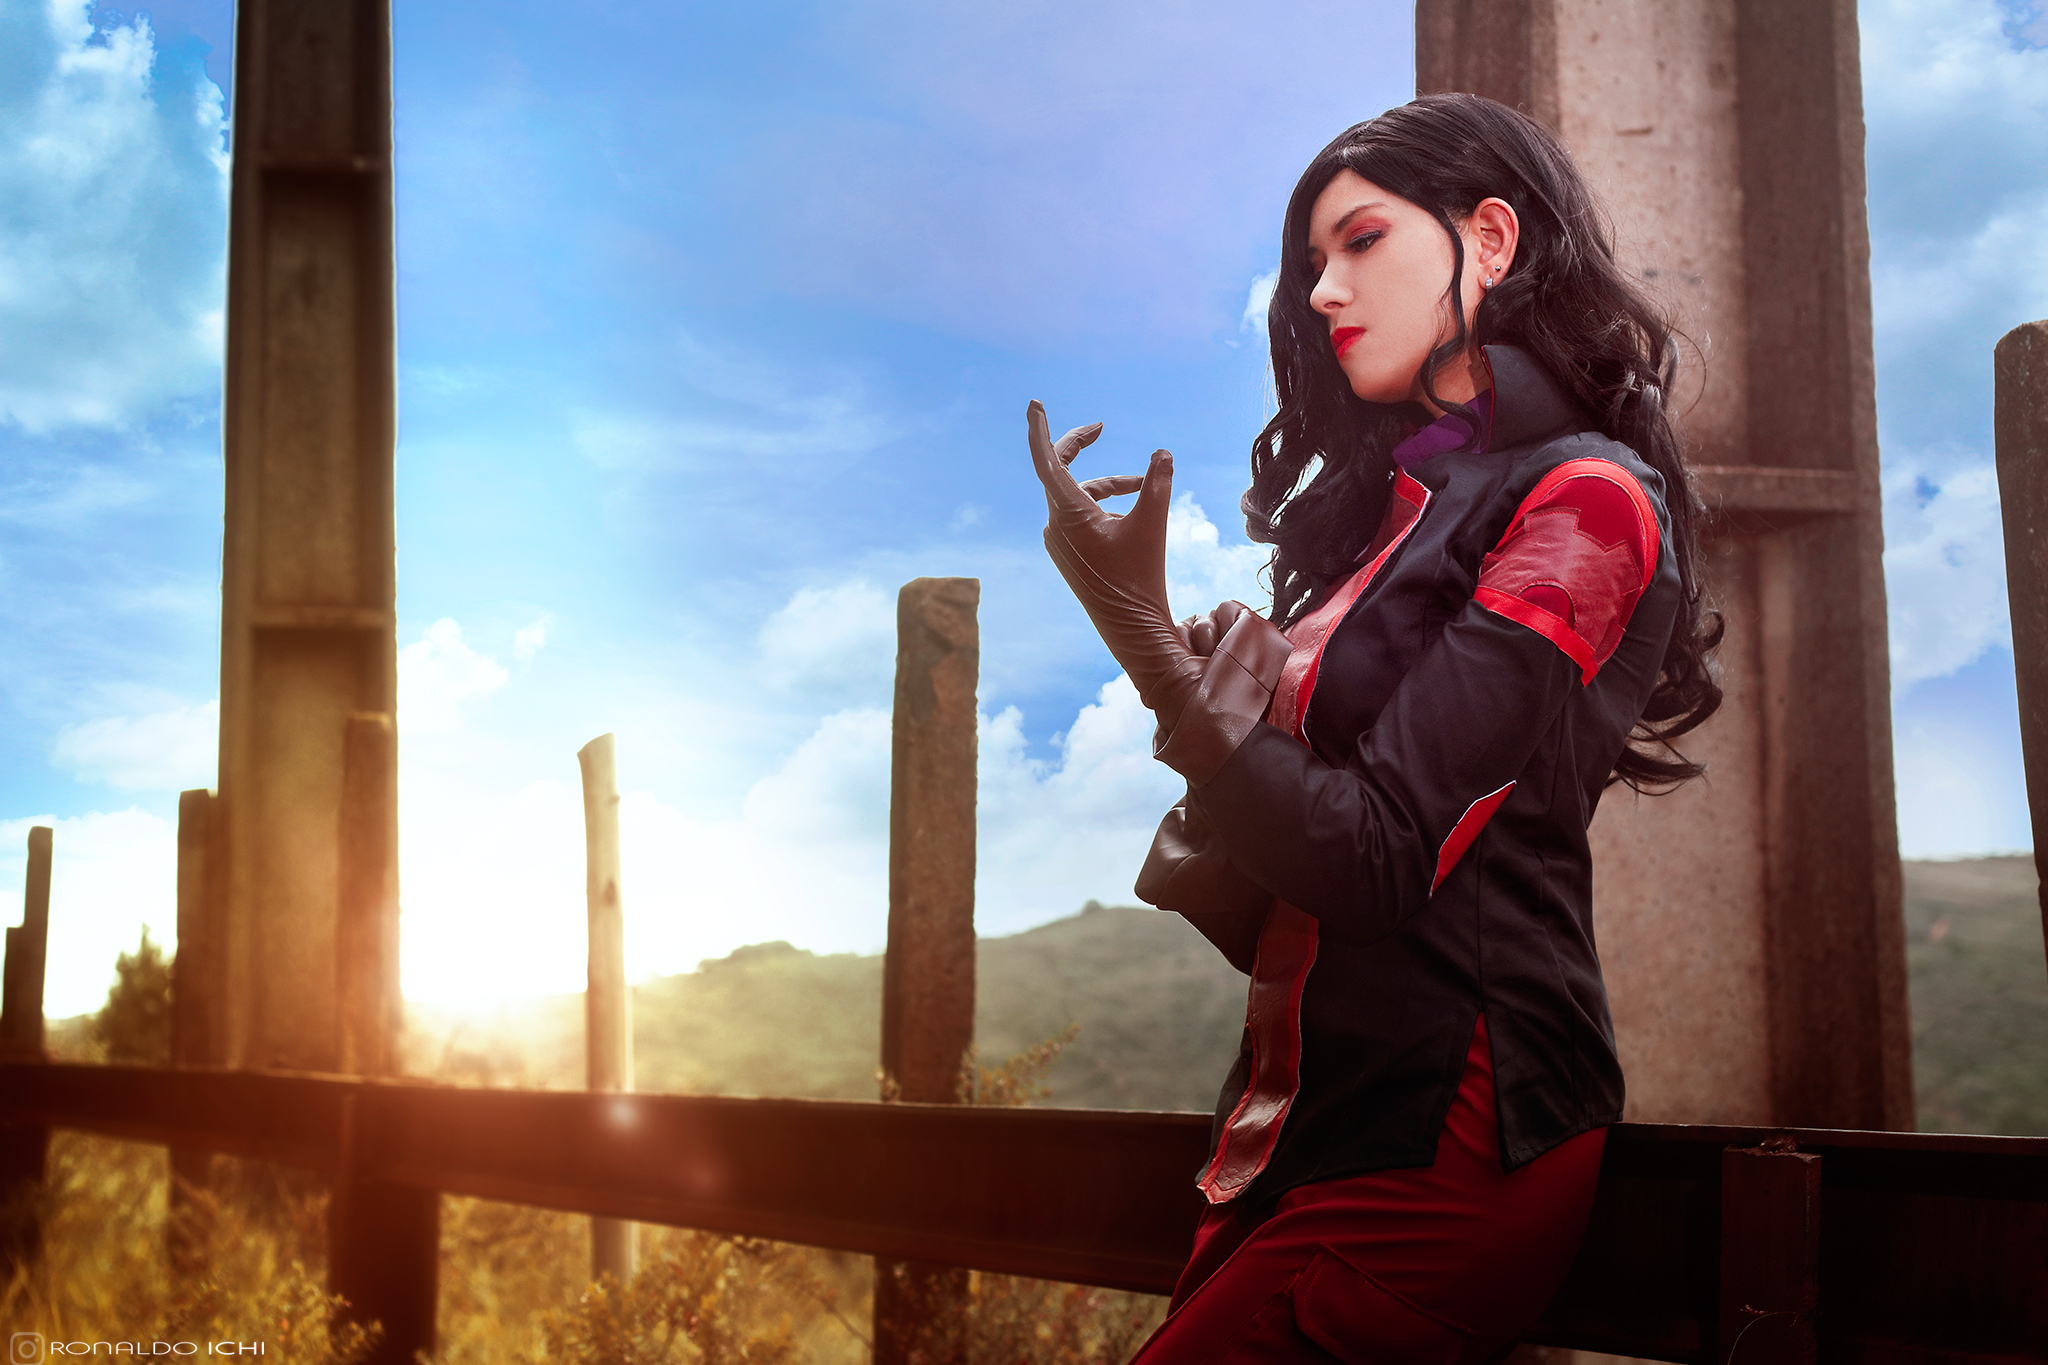 cosplay - Korra and Asami Sato from The Legend of Korra - cosplayers Rizzy and Rach - photography by Ronaldo Ichi